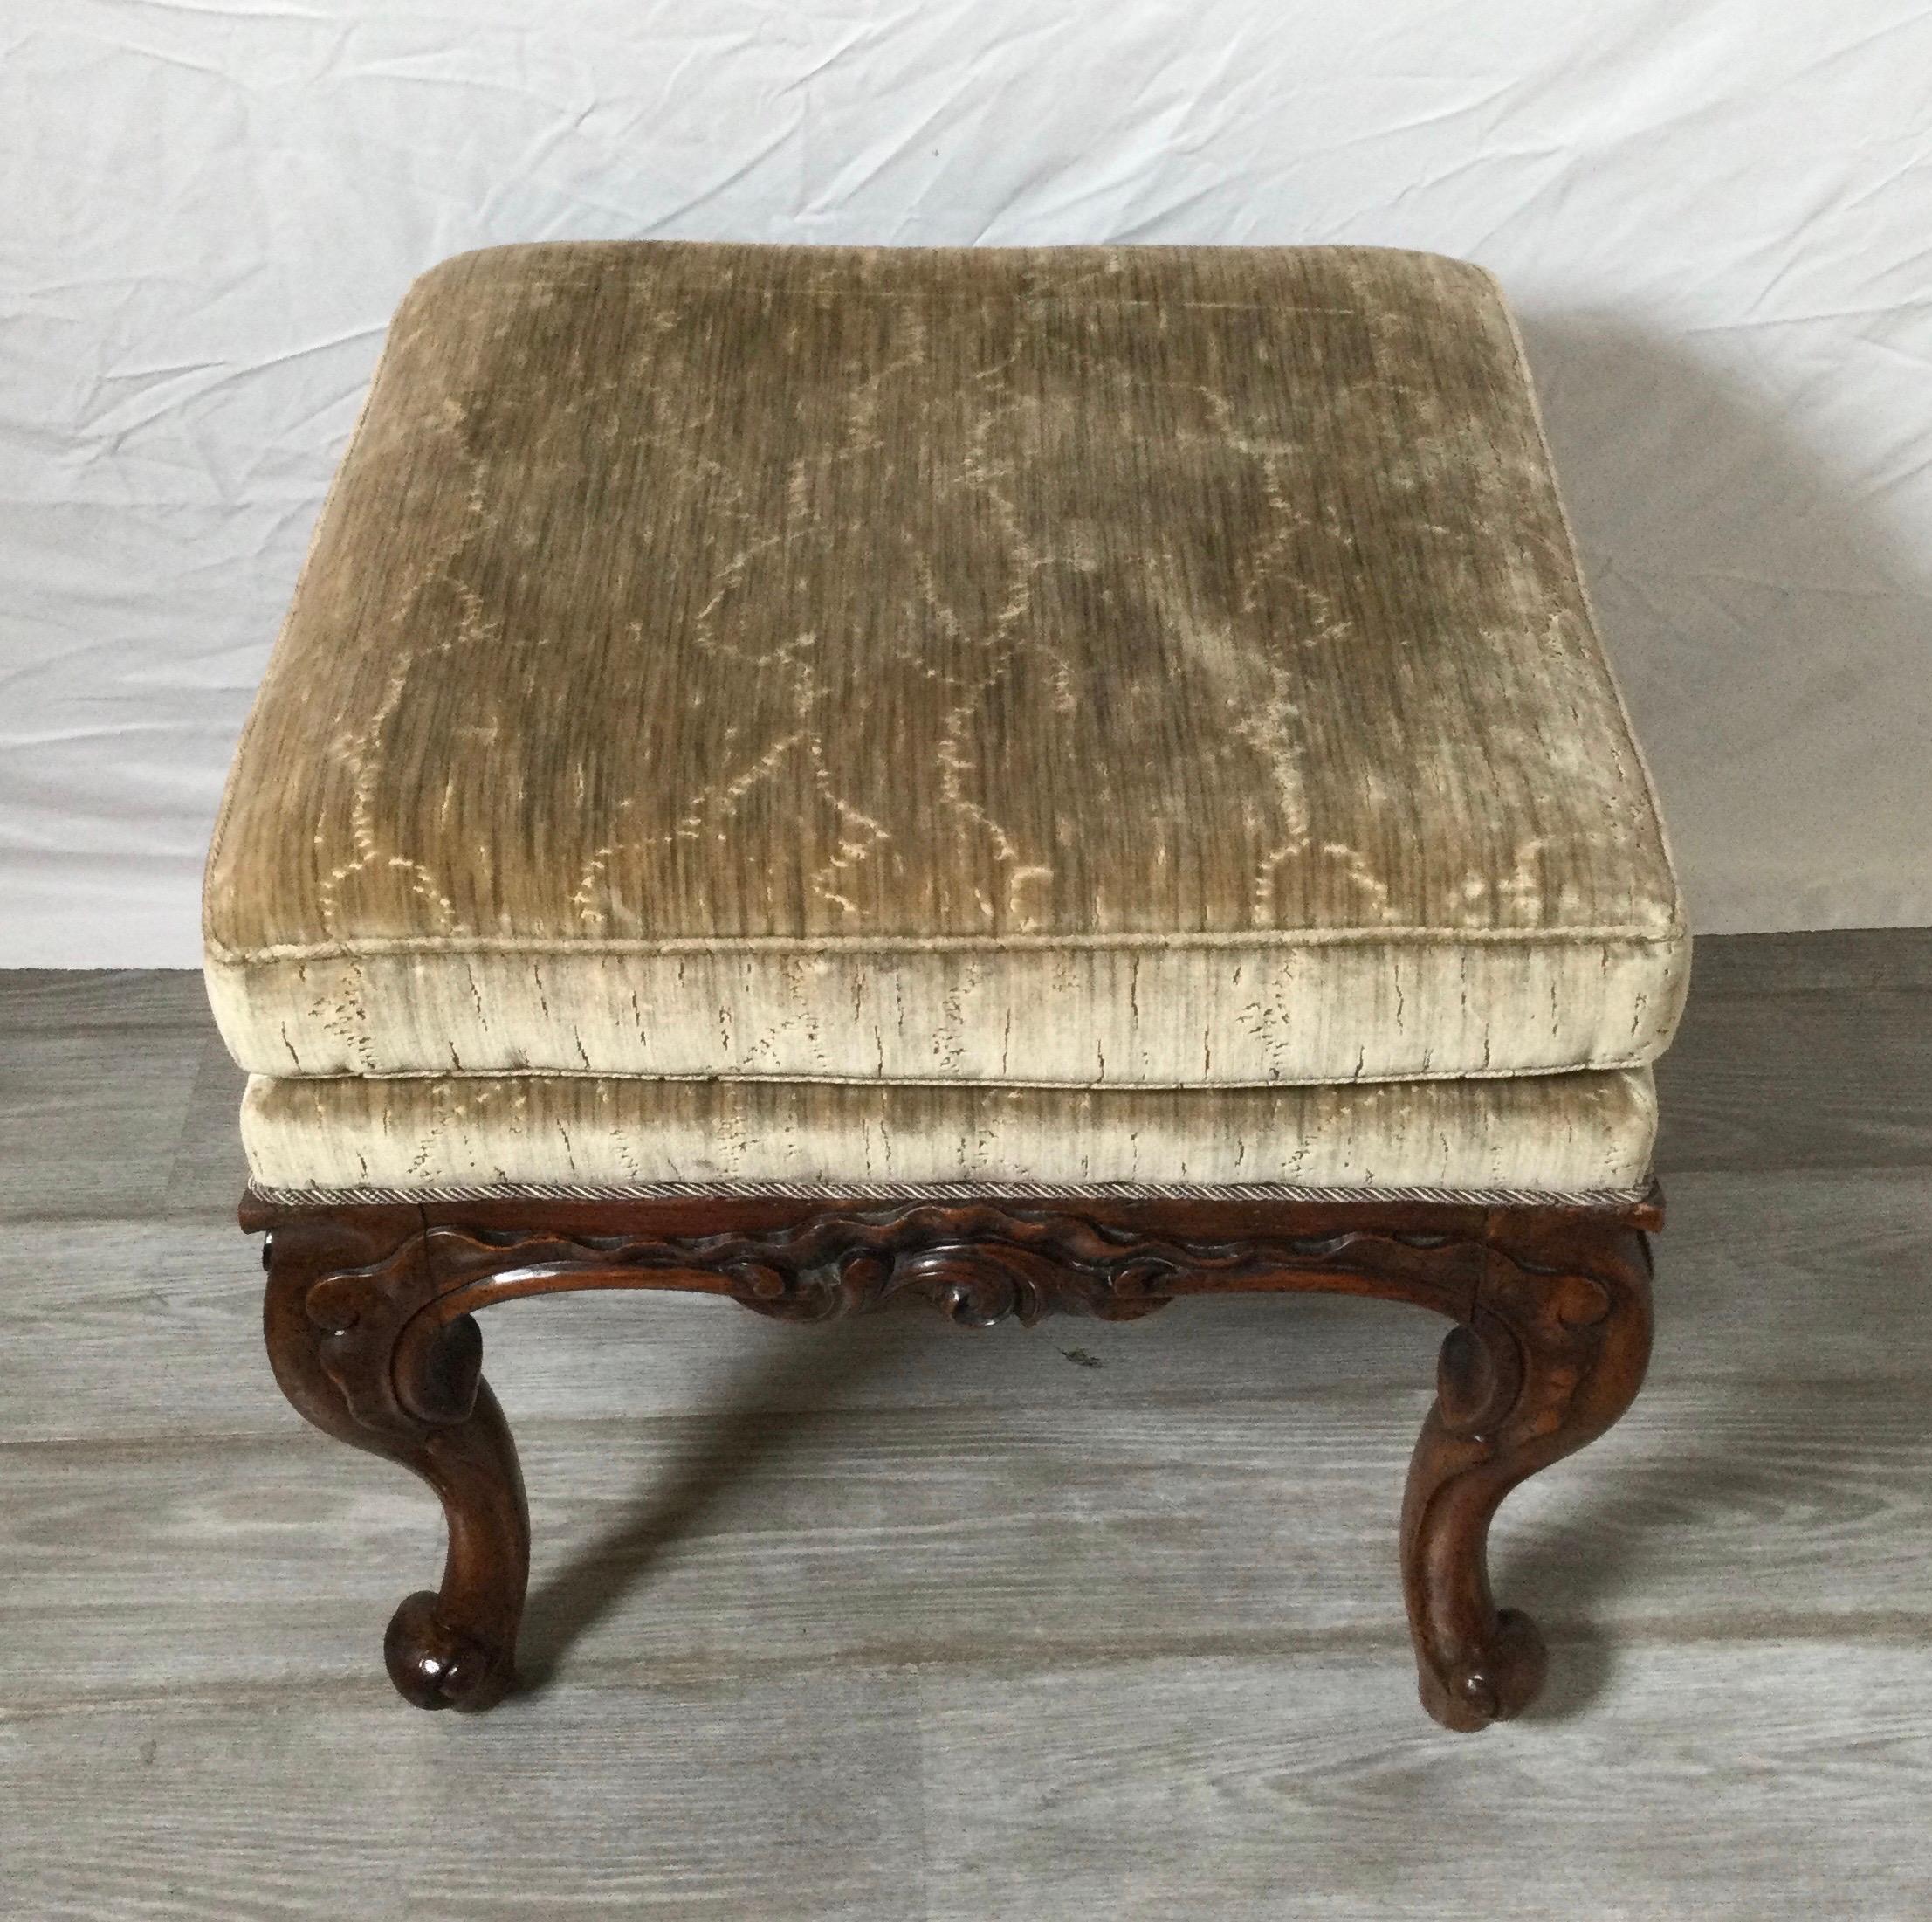 A beautifully hand carve walnut bench with upholstered base and legs with upholstered attached cushion top. The fabric withought tears or stains in a faded dusty gray blue. the graceful cabriole legs in a rich dark walnut color with excellent